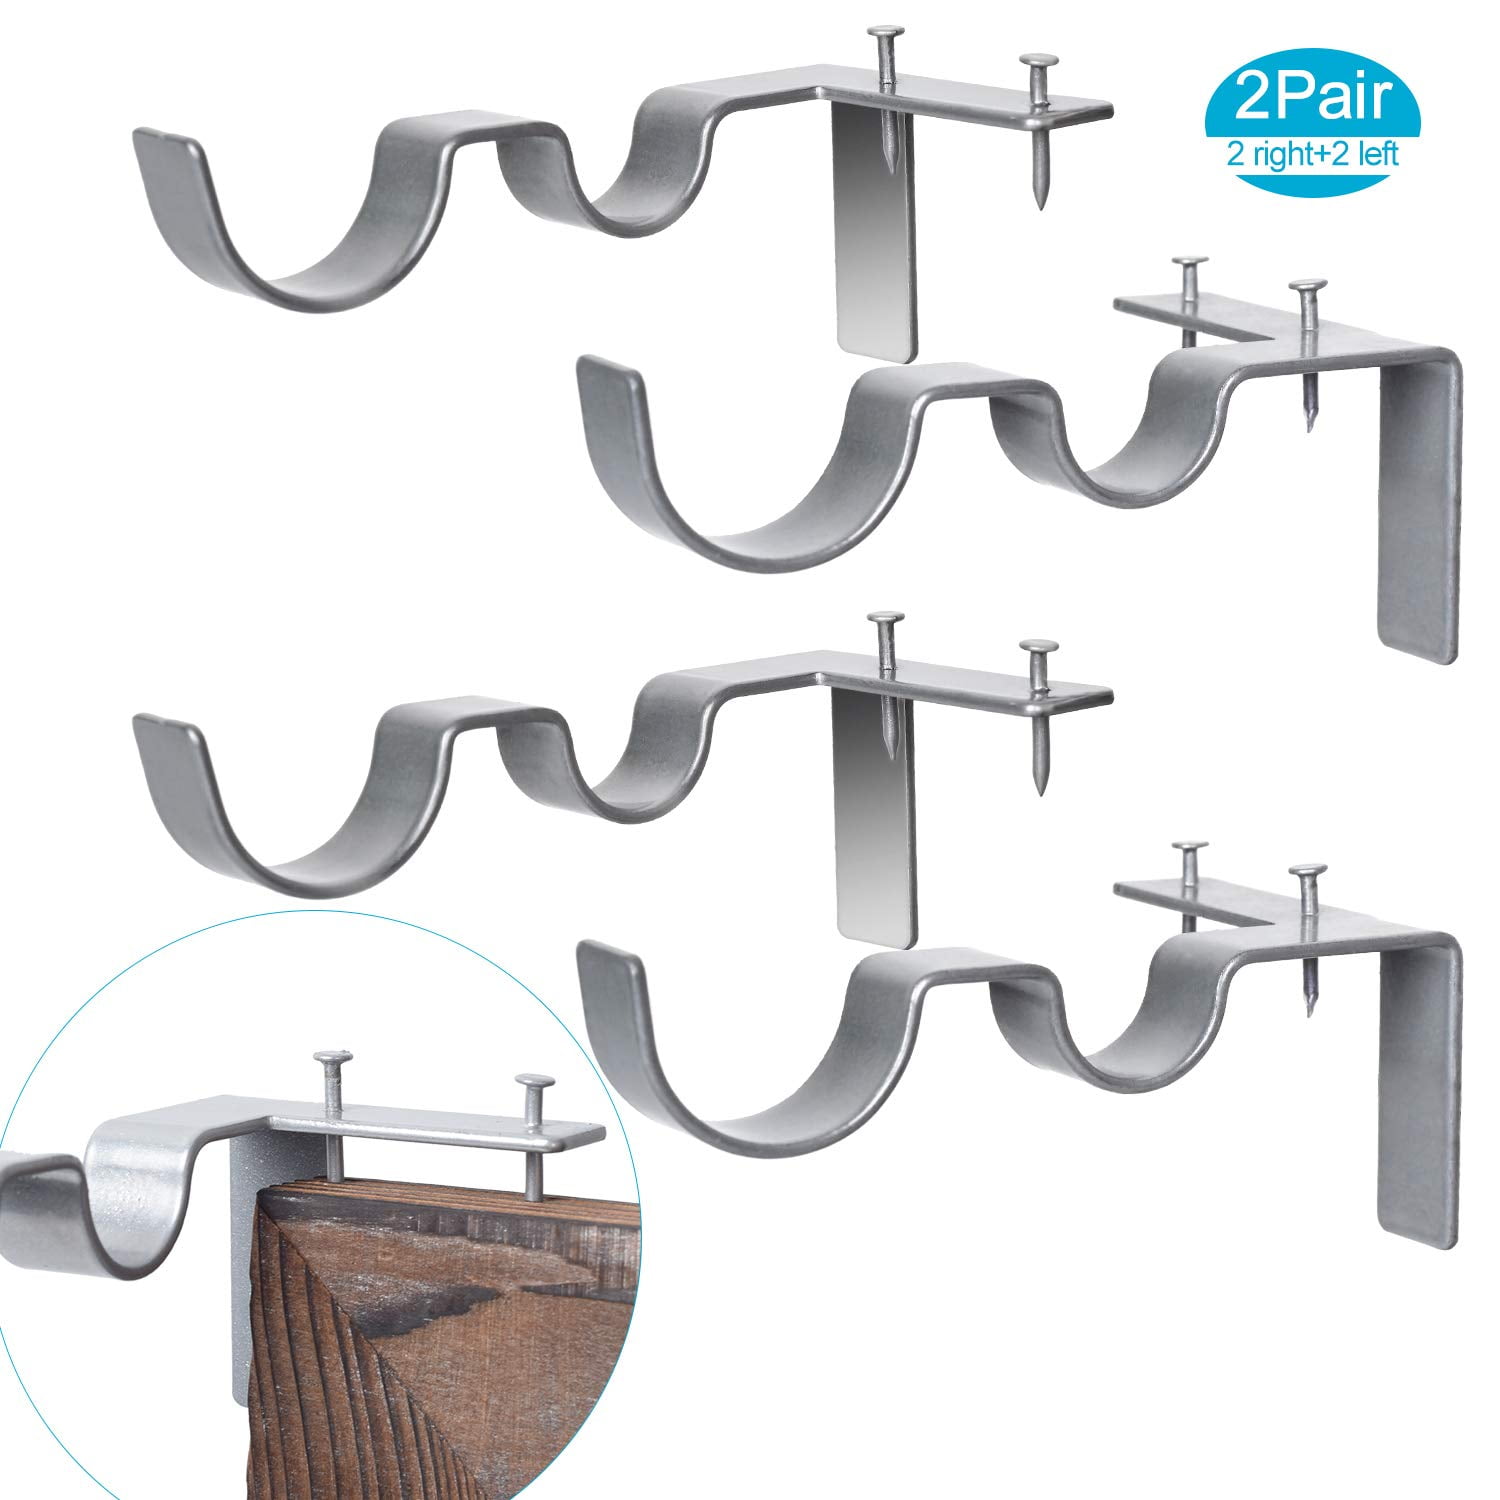 2pc Curtain Rod Brackets No Drill Adjustable Hang Curtain Rod Holder for Kitchen 